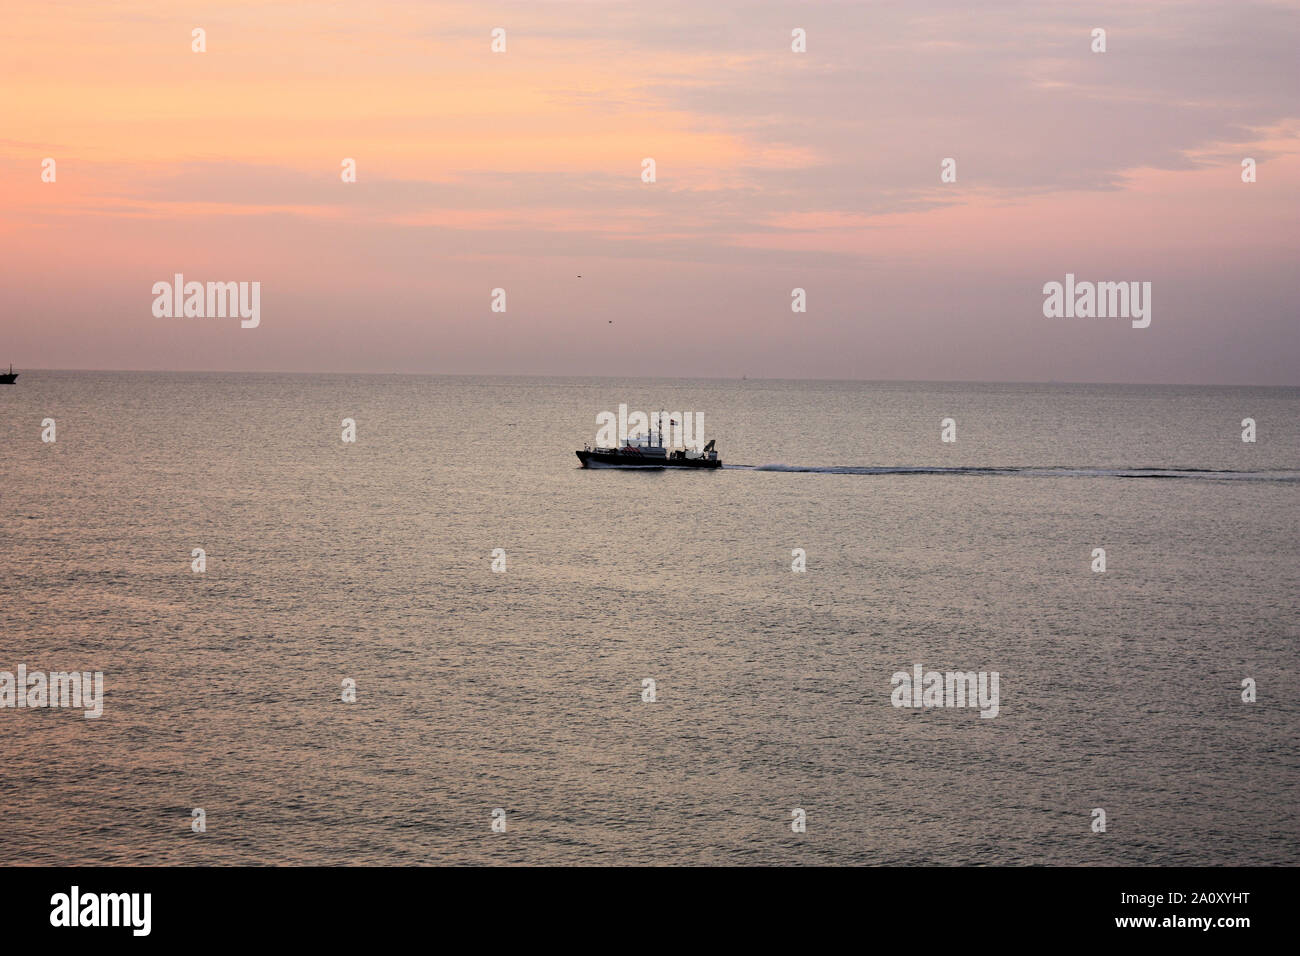 A beautiful view at the waters of Scheveningen in a summer evening when a passenger boat is passing through the sea. Stock Photo